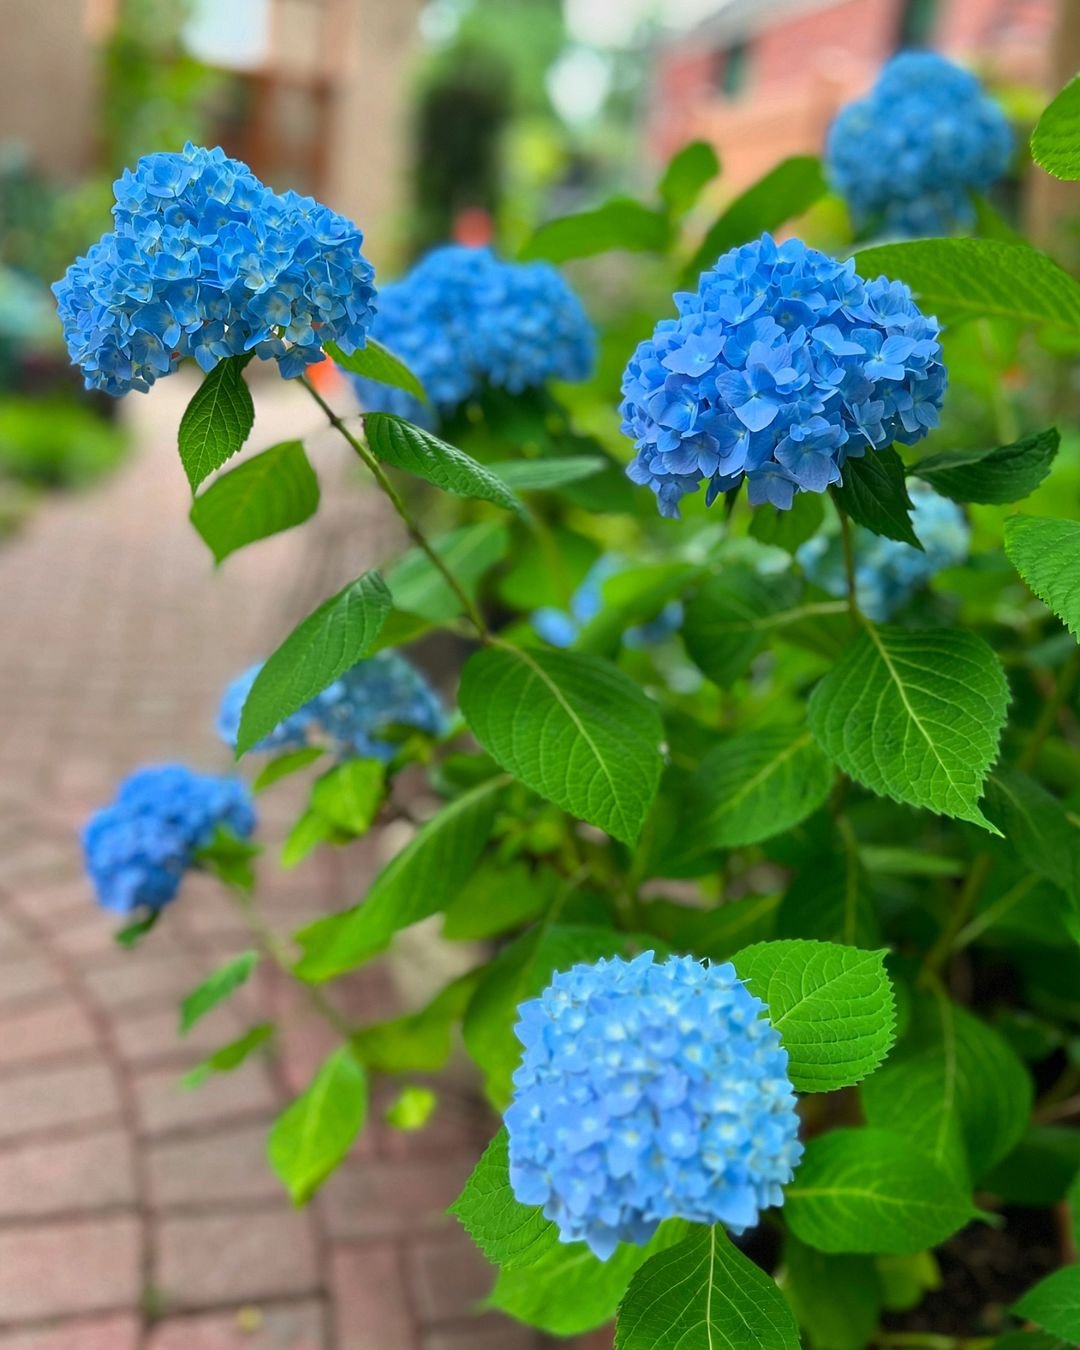  Blue Hydrangea (Hydrangea macrophylla) with large clusters of vibrant blue flowers and green leaves.